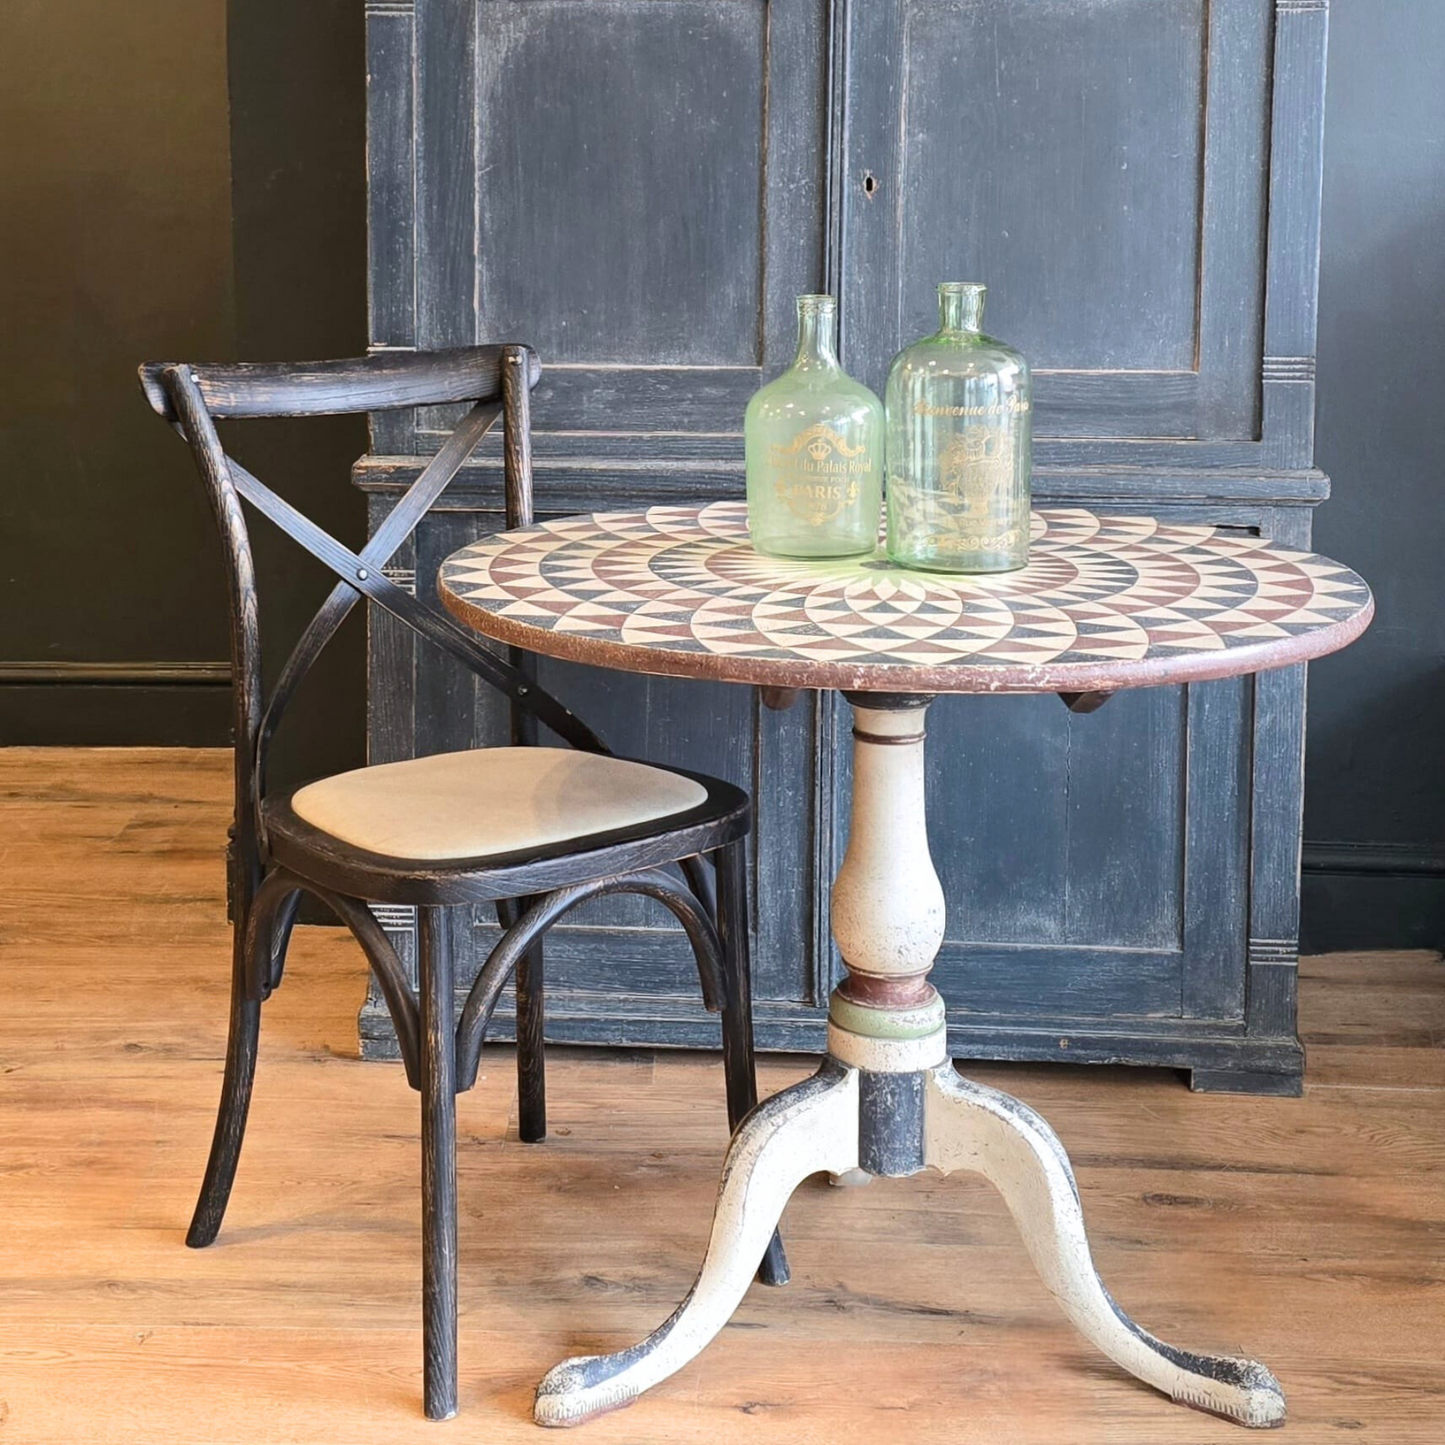 Rustic Tilted Painted Round Table